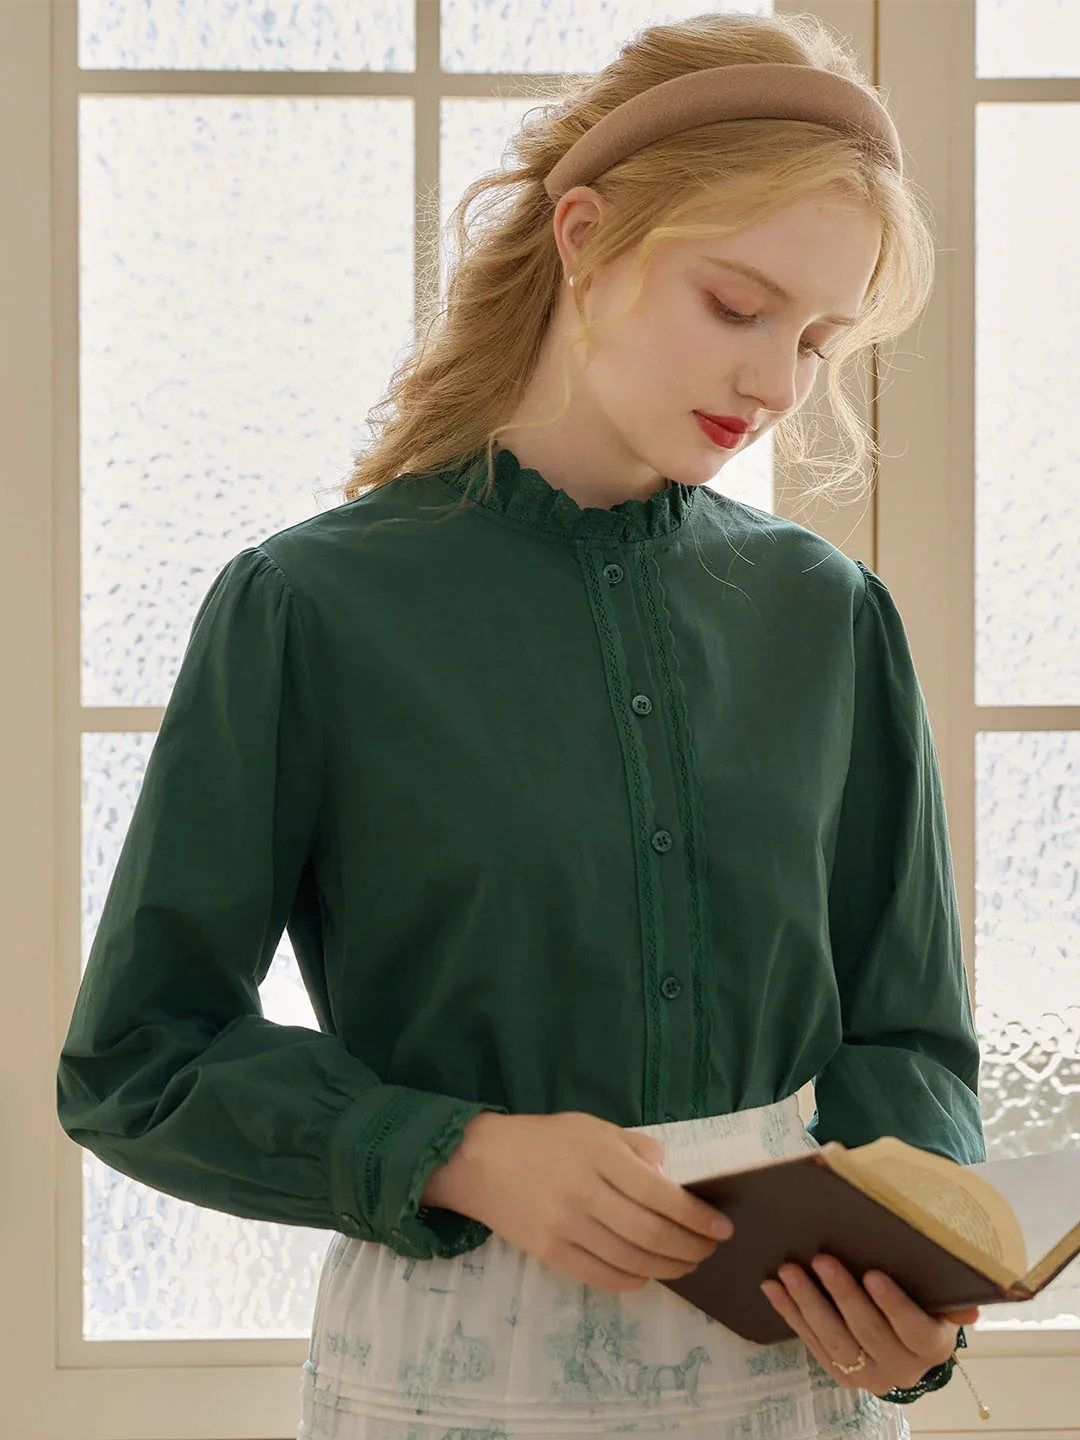 【Holiday Sale】Yamileth Retro Mock Collar Lace Trimmed Paneled Green Blouse